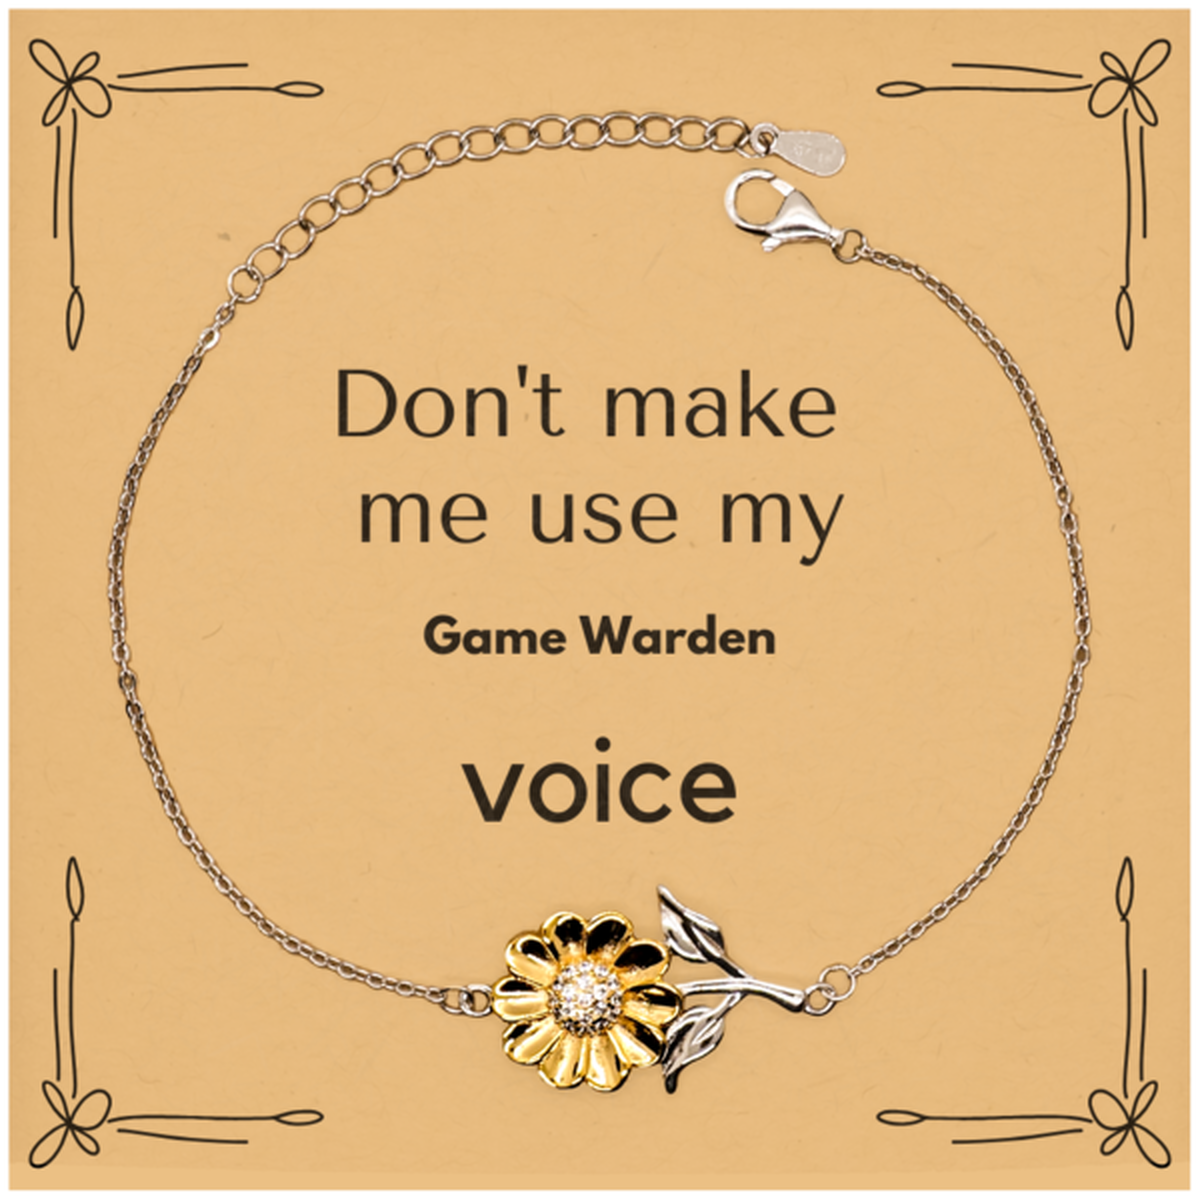 Don't make me use my Game Warden voice, Sarcasm Game Warden Card Gifts, Christmas Game Warden Sunflower Bracelet Birthday Unique Gifts For Game Warden Coworkers, Men, Women, Colleague, Friends